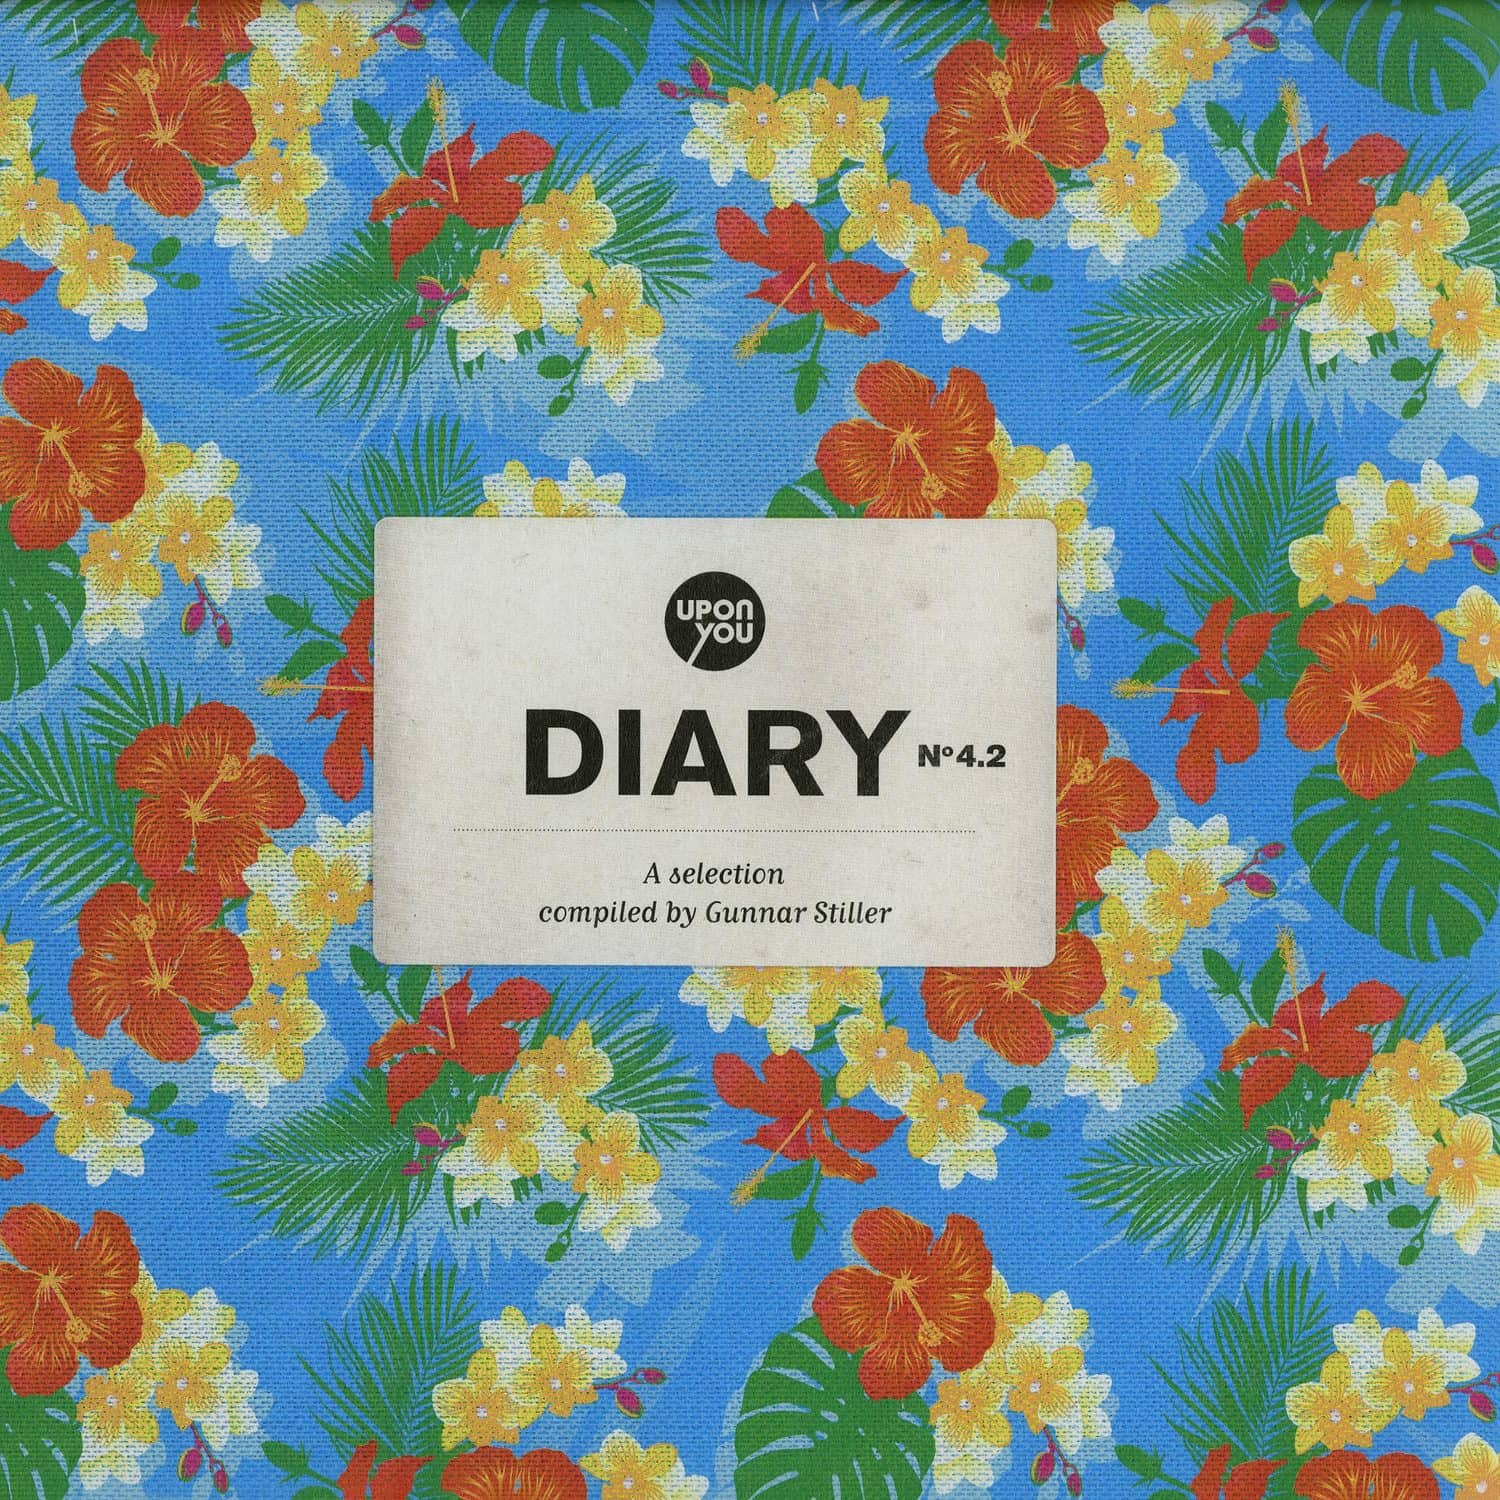 Ruede Hagelstein, M. Resmann, Gorge, Bea - A SELECTION OF DIARY 4.2